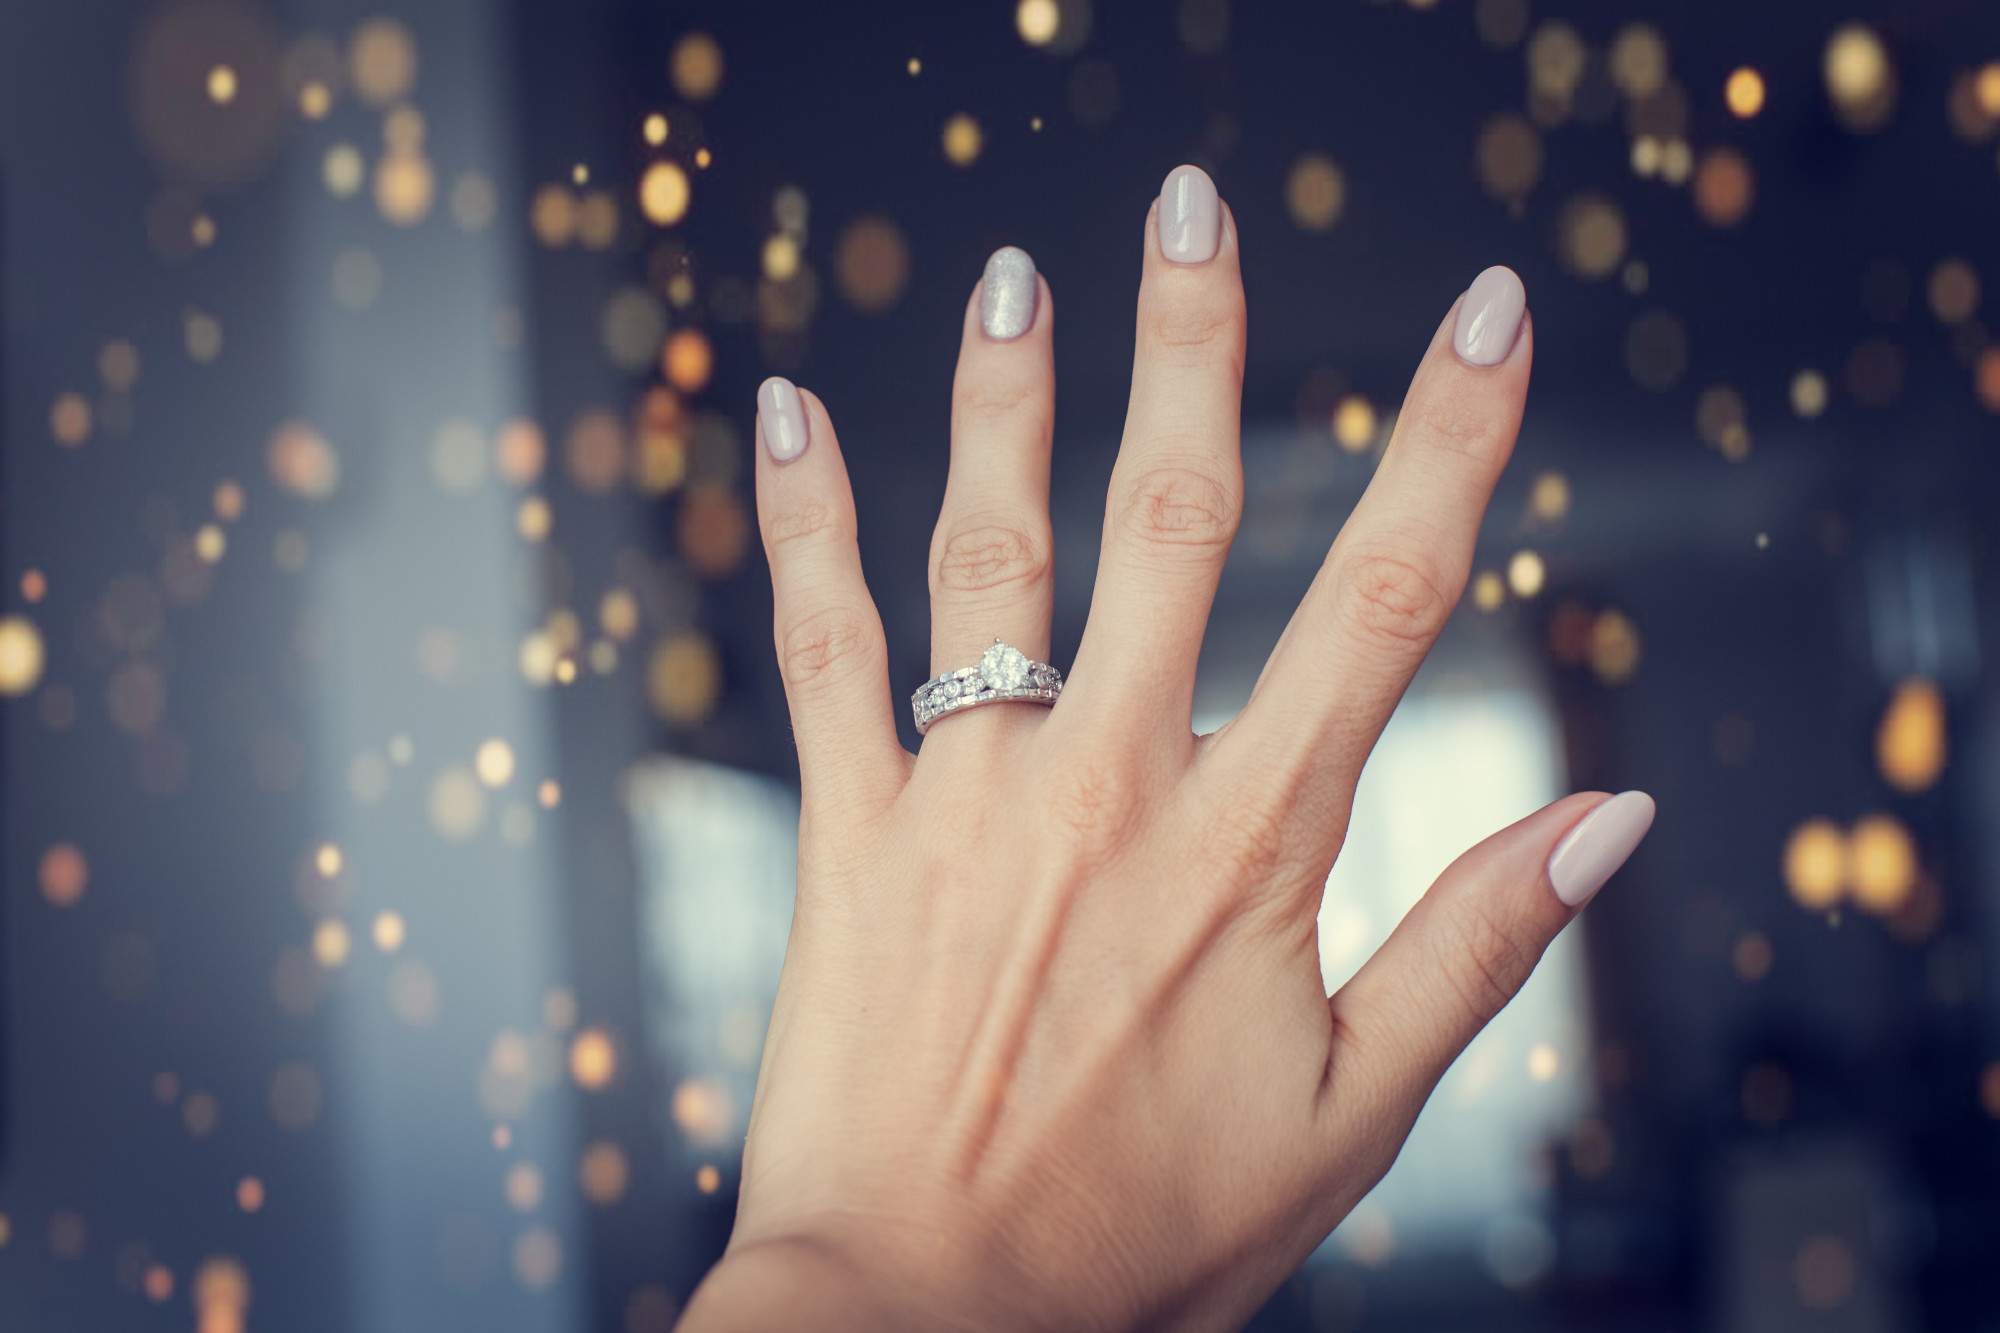 How Do I Choose the Best Engagement Ring for the Love of My Life?